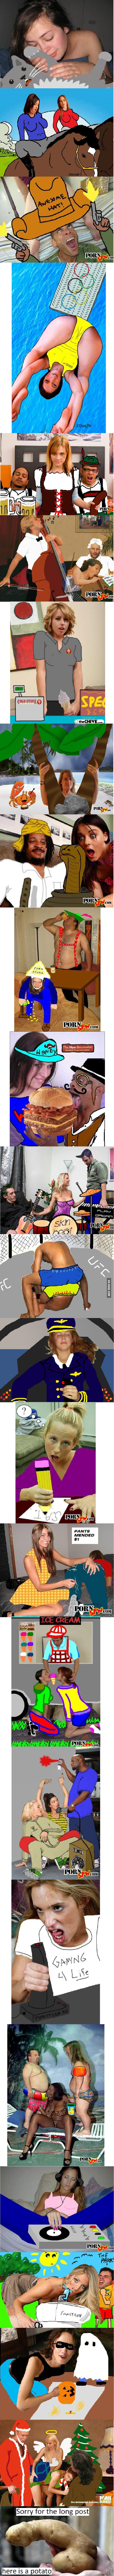 Porn+ms paint is hilarious (safe for work) - 9GAG